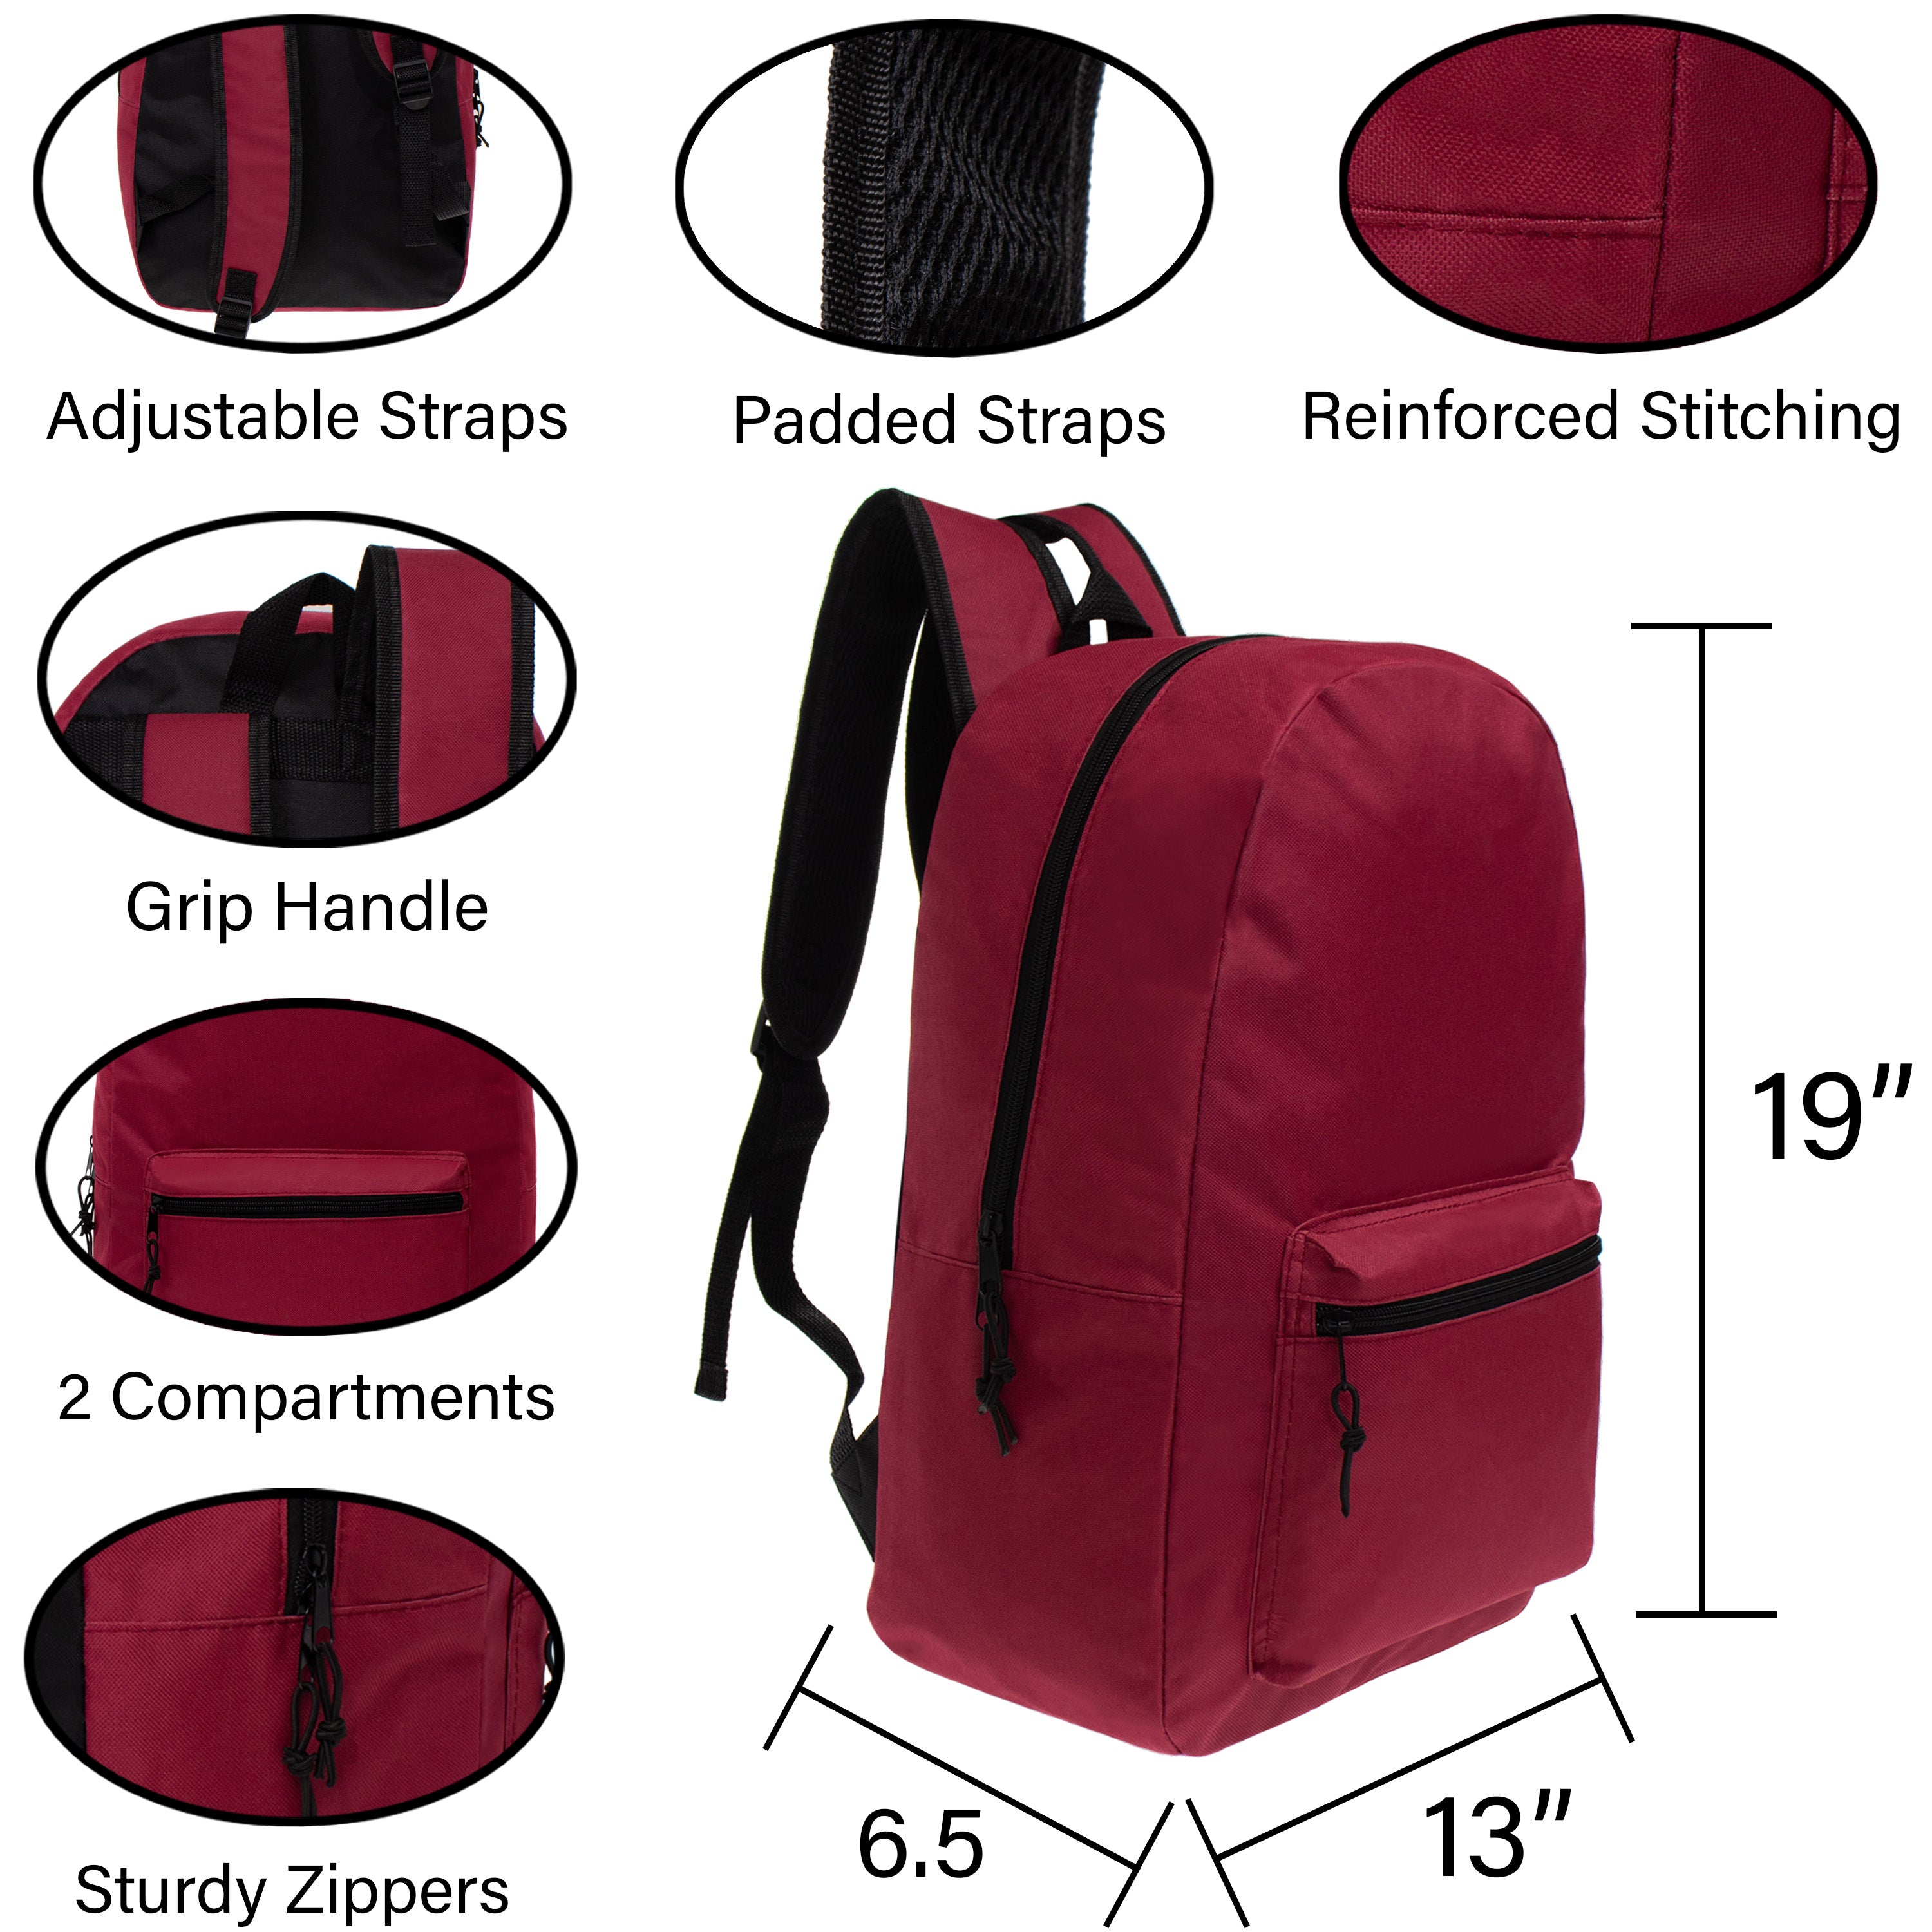 19" Bulk Backpacks in 12 Assorted Colors with 52 Piece School Supply Kits - Case of 12 Value, Bundle Pack